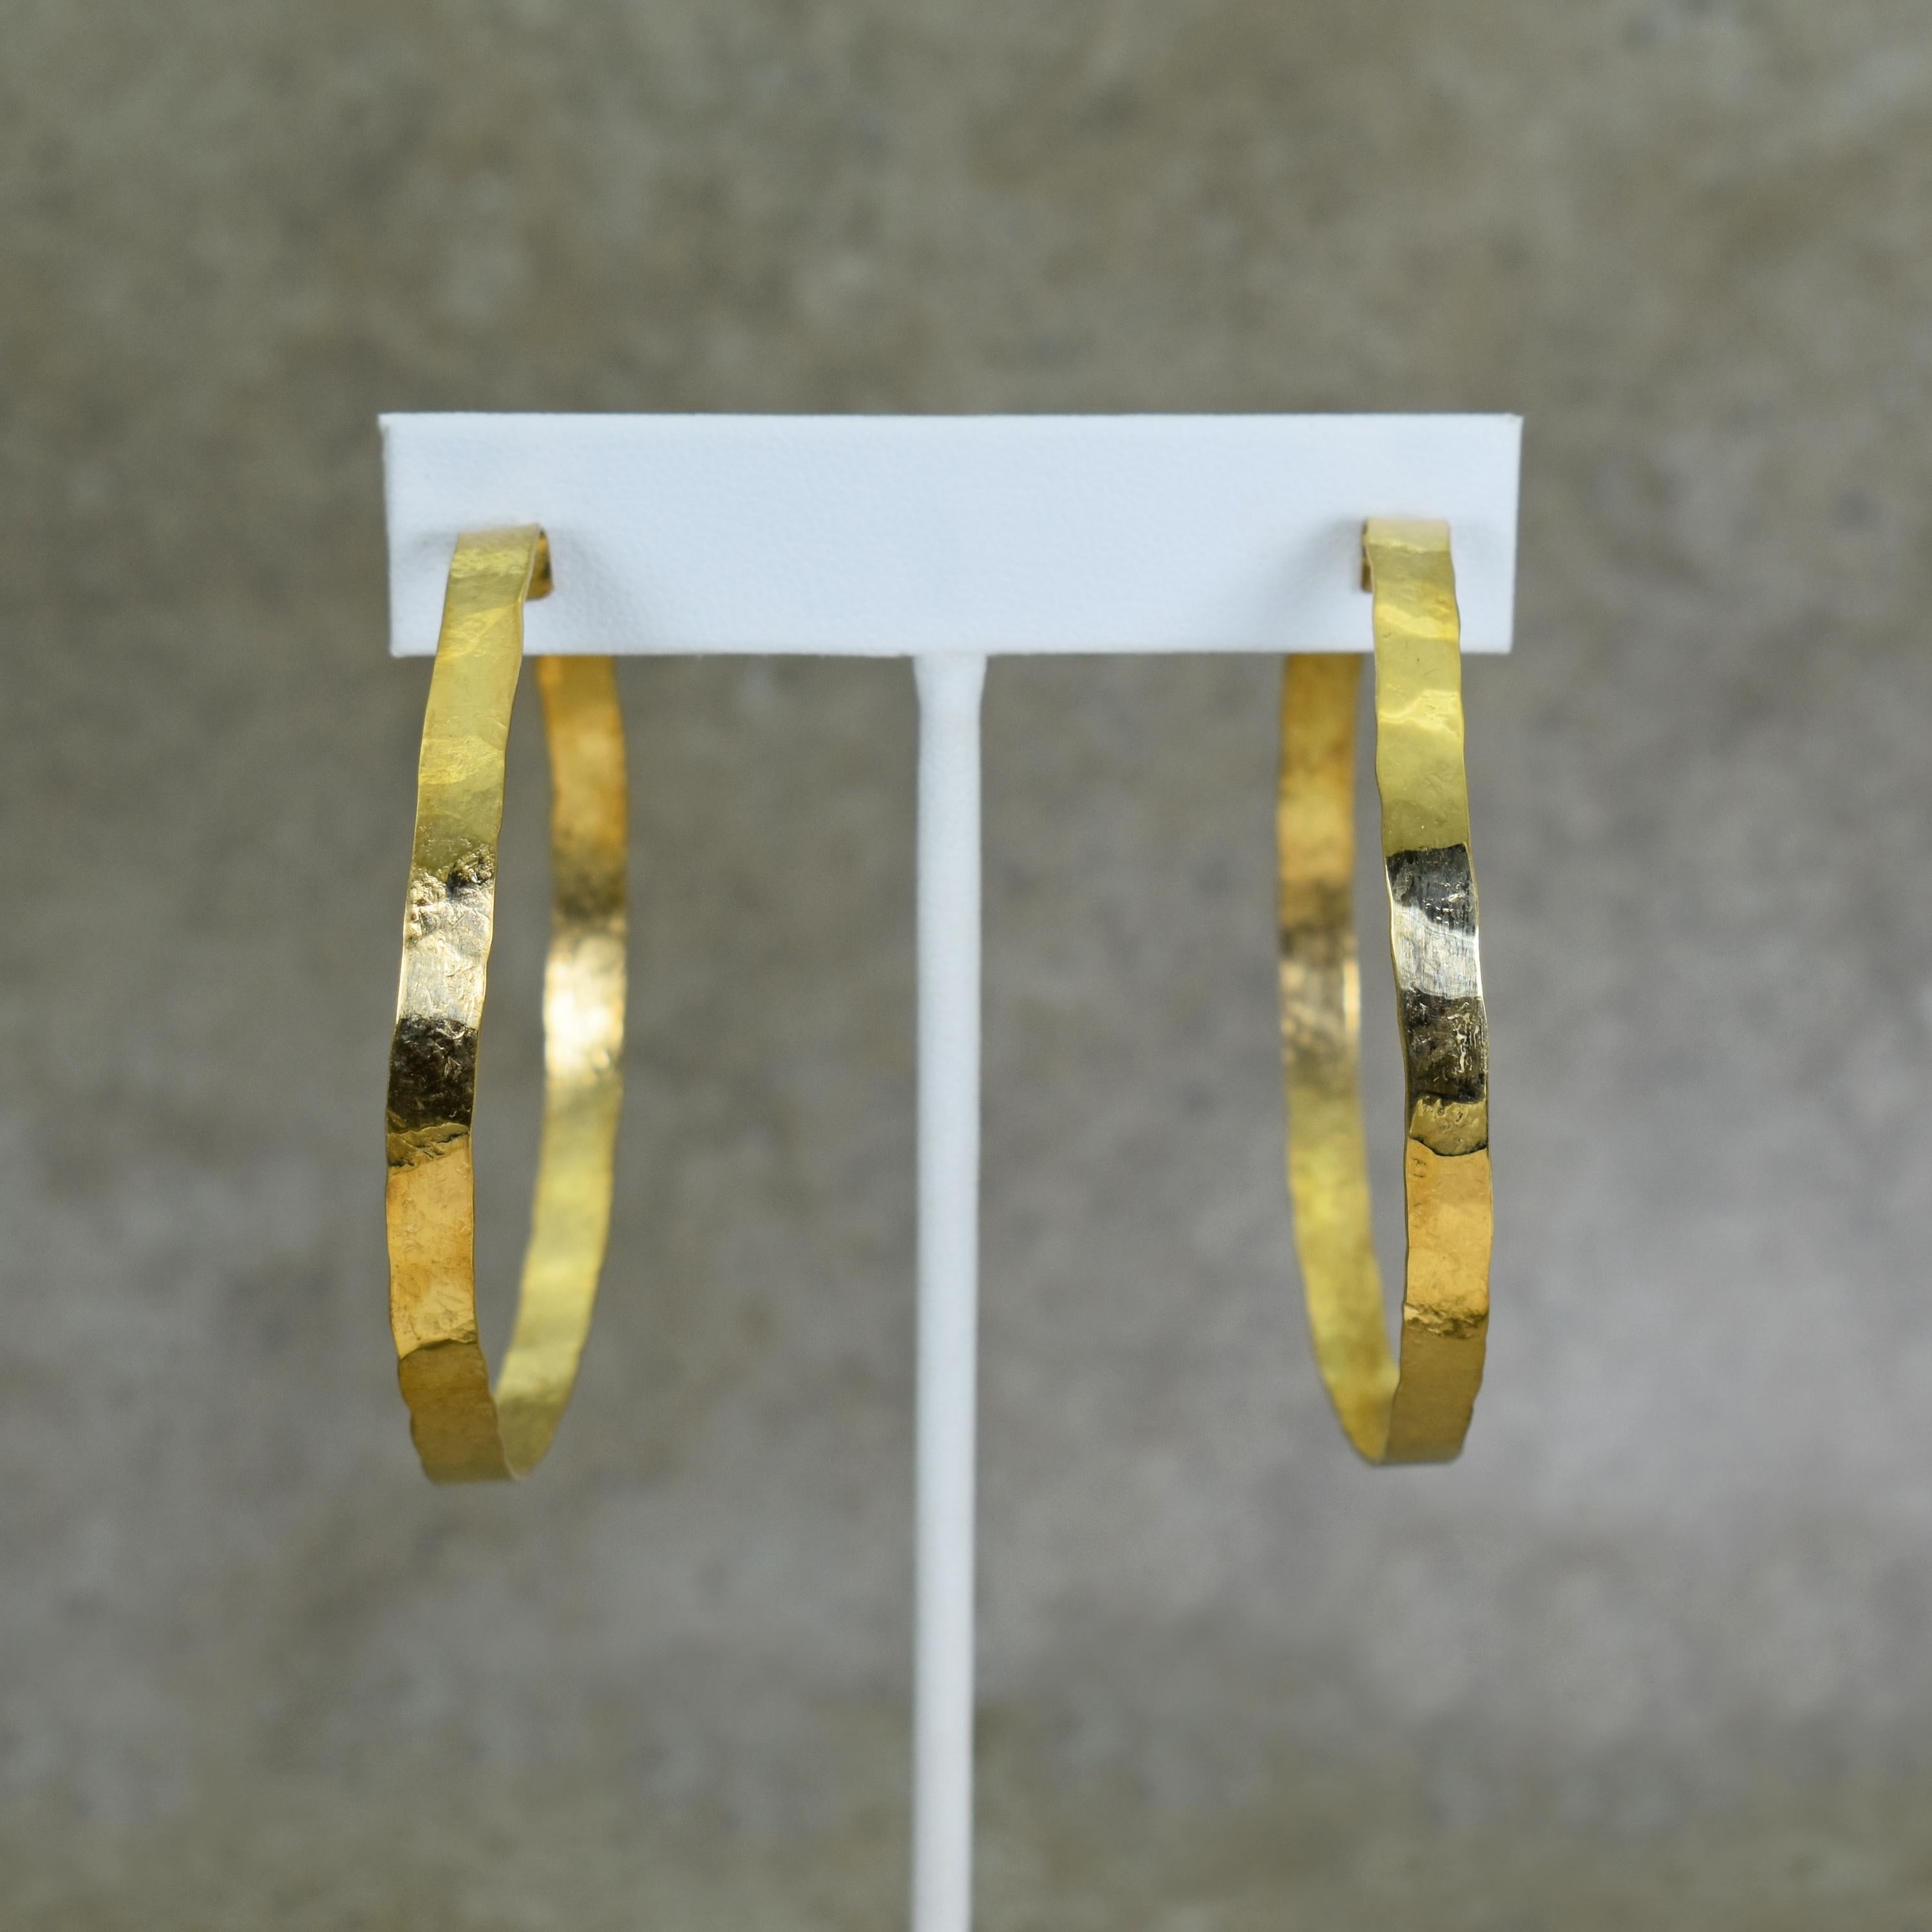 Large, solid 18k yellow gold hoop earrings. Each hoop is hand-forged and finished with a hammered, rustic texture. Earrings are 2.25